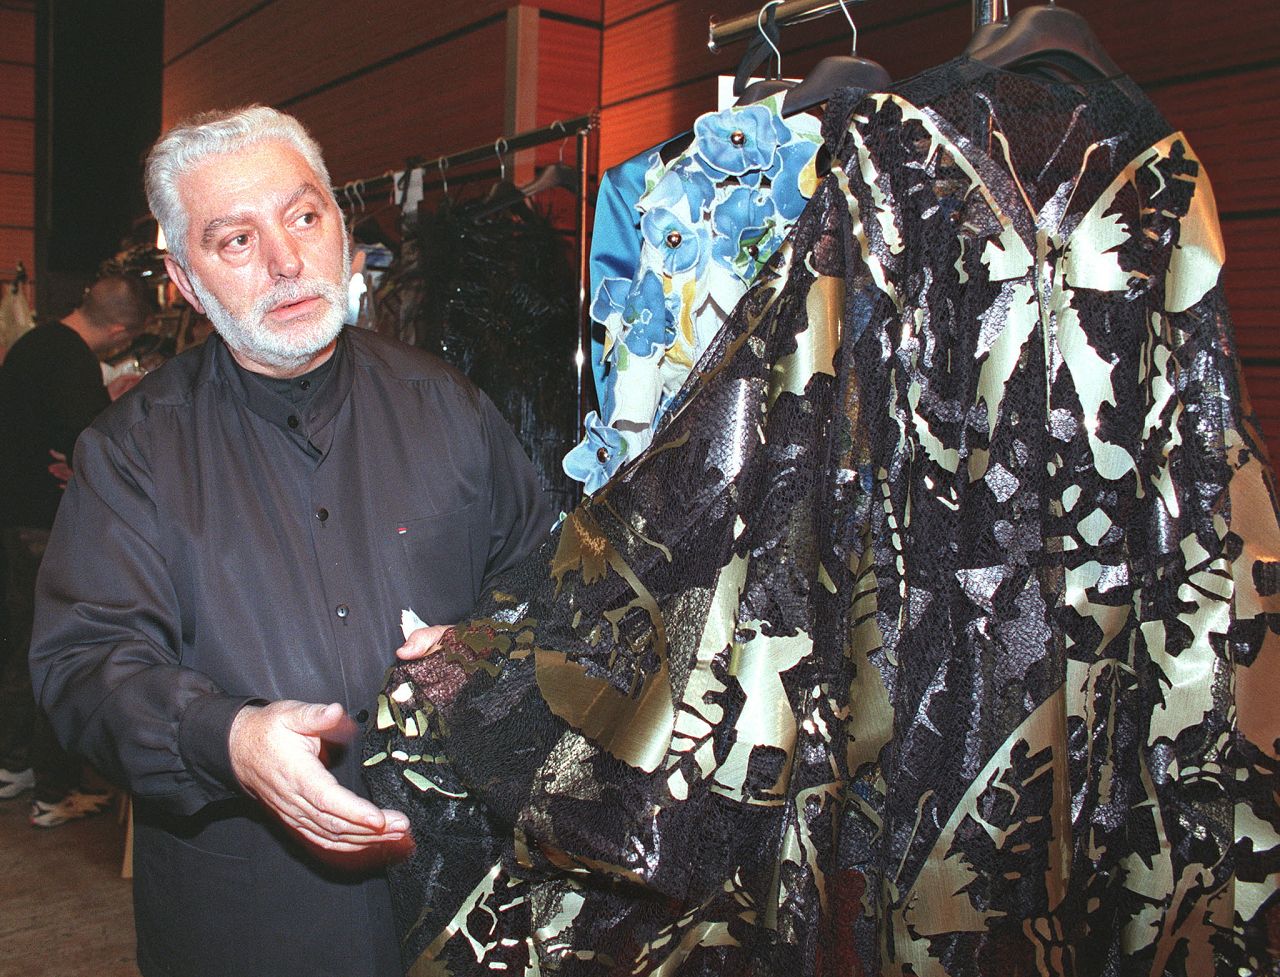 Fashion designer Paco Rabanne checking a dress before the presentation of his Spring/Summer 1999 haute-couture collection, January 20, 1999 in Paris.